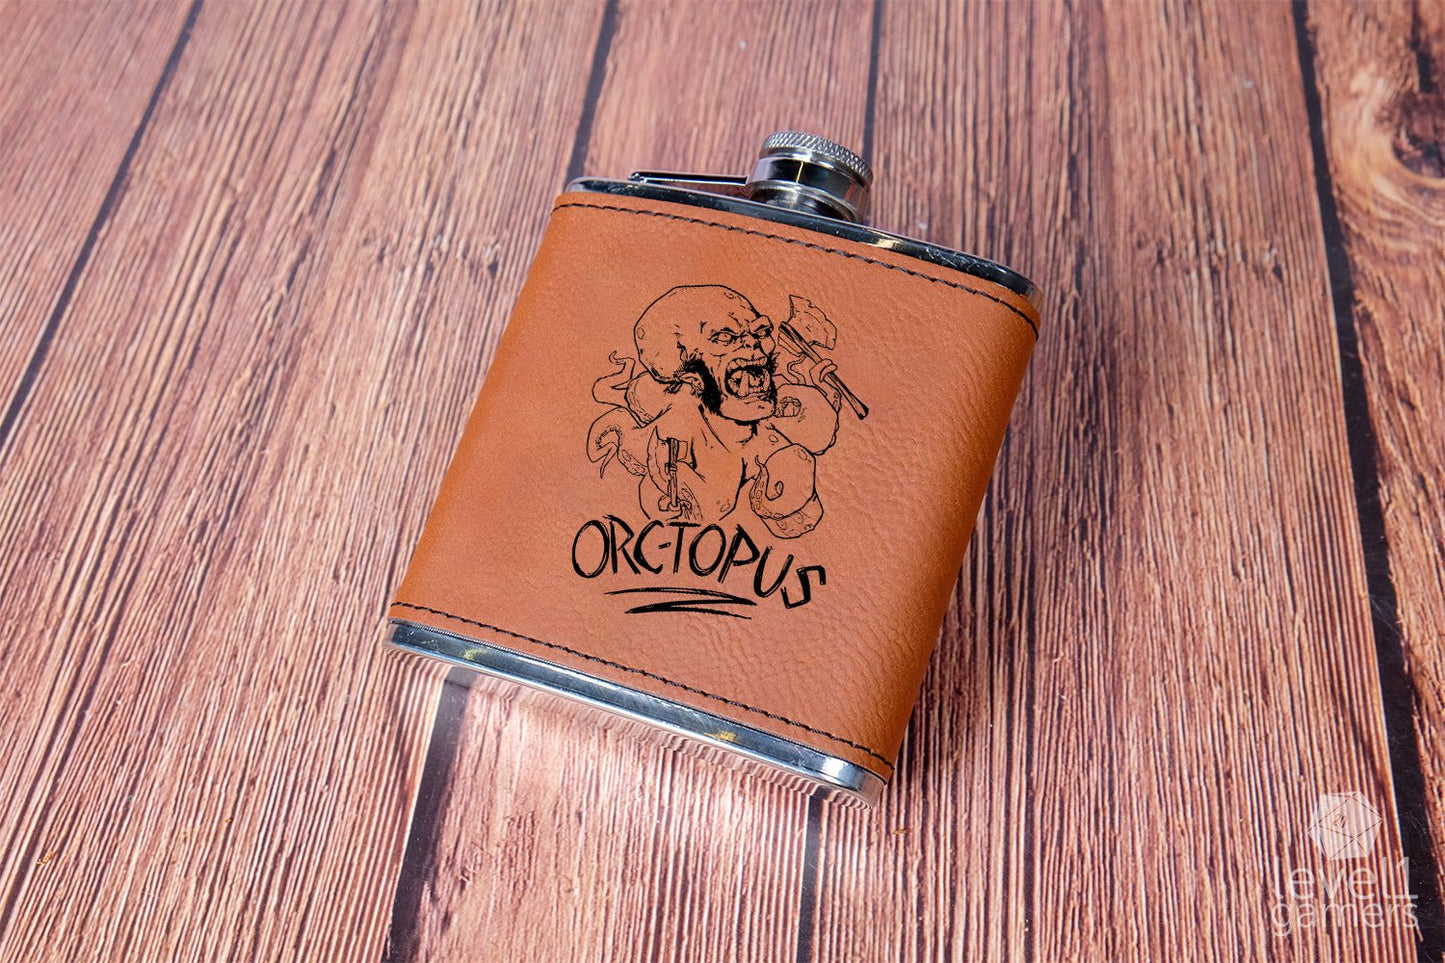 Orctopus Flask  Level 1 Gamers   